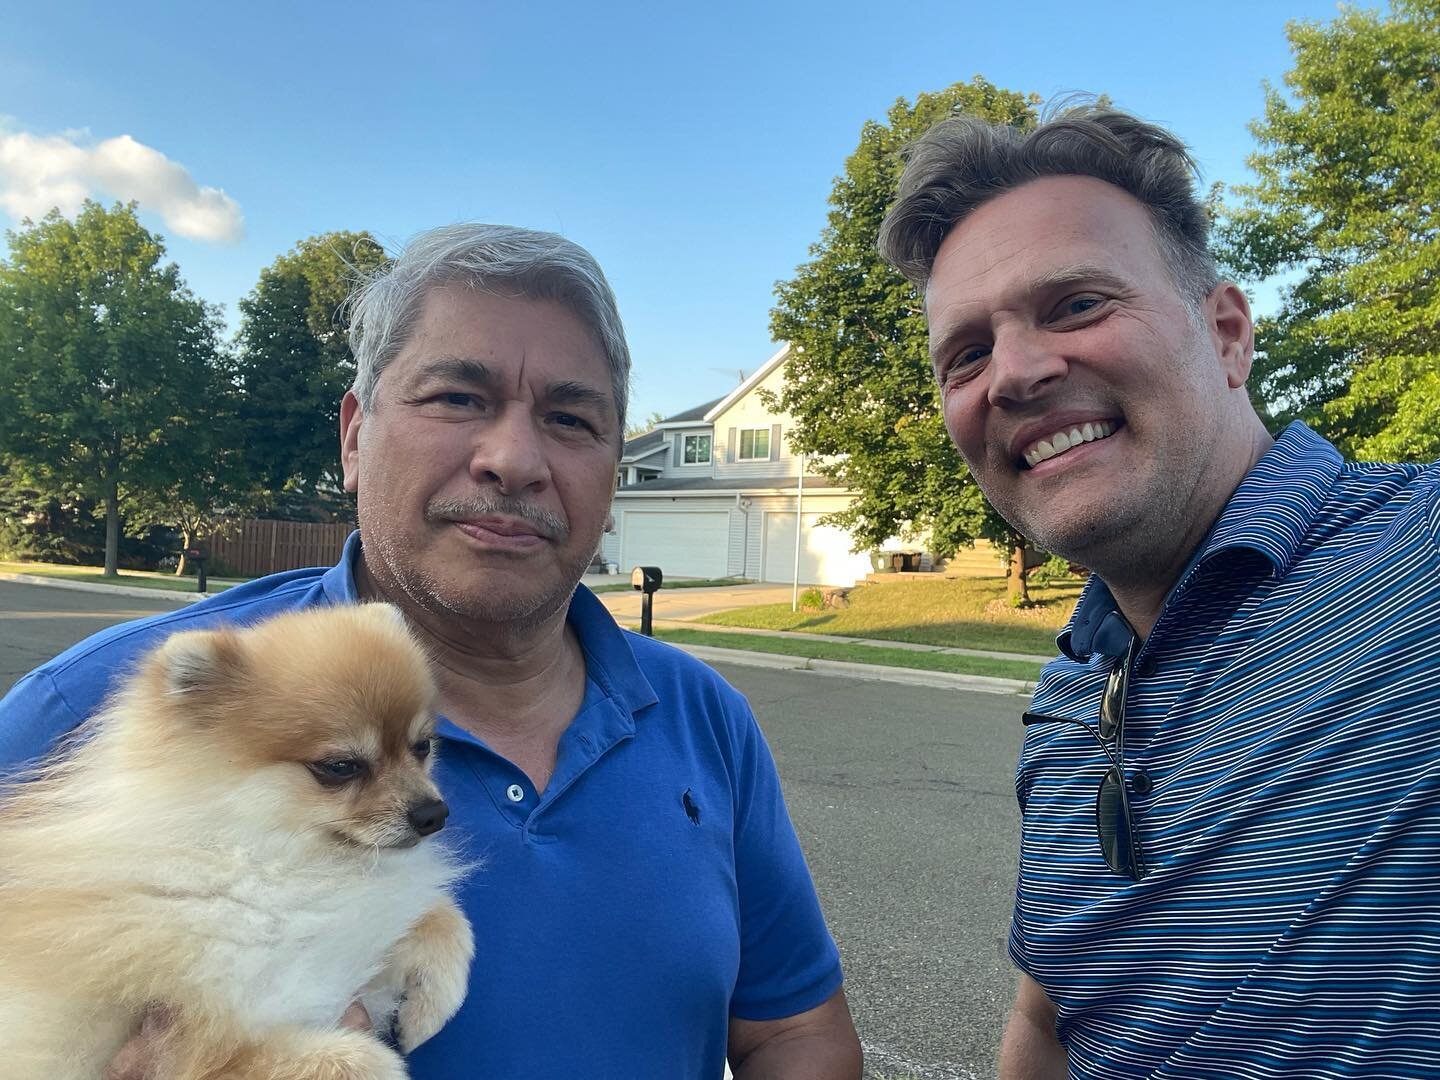 Proud to have Santiago Rosa&rsquo;s support (and his dog Jack&rsquo;s) - a wonderful public servant and former Madison City Council Member - we are lucky to have him here in Sun Prairie! 

#publicservant